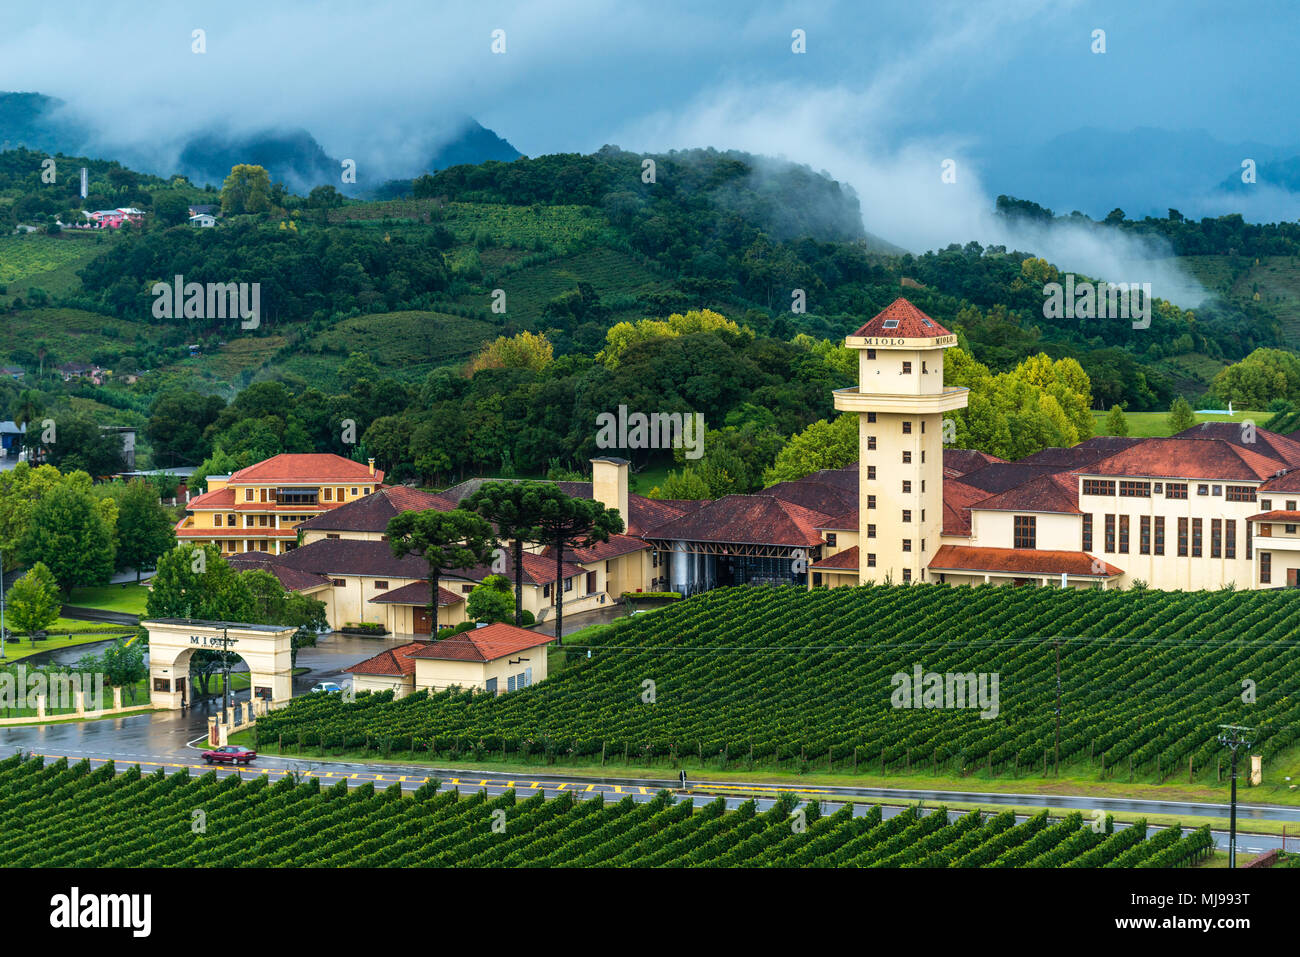 Winery 'Miolo' sourrounded by vinyards, Vale dos Vinhedos, Rio Grande do Sul, Brazil, Latin America Stock Photo